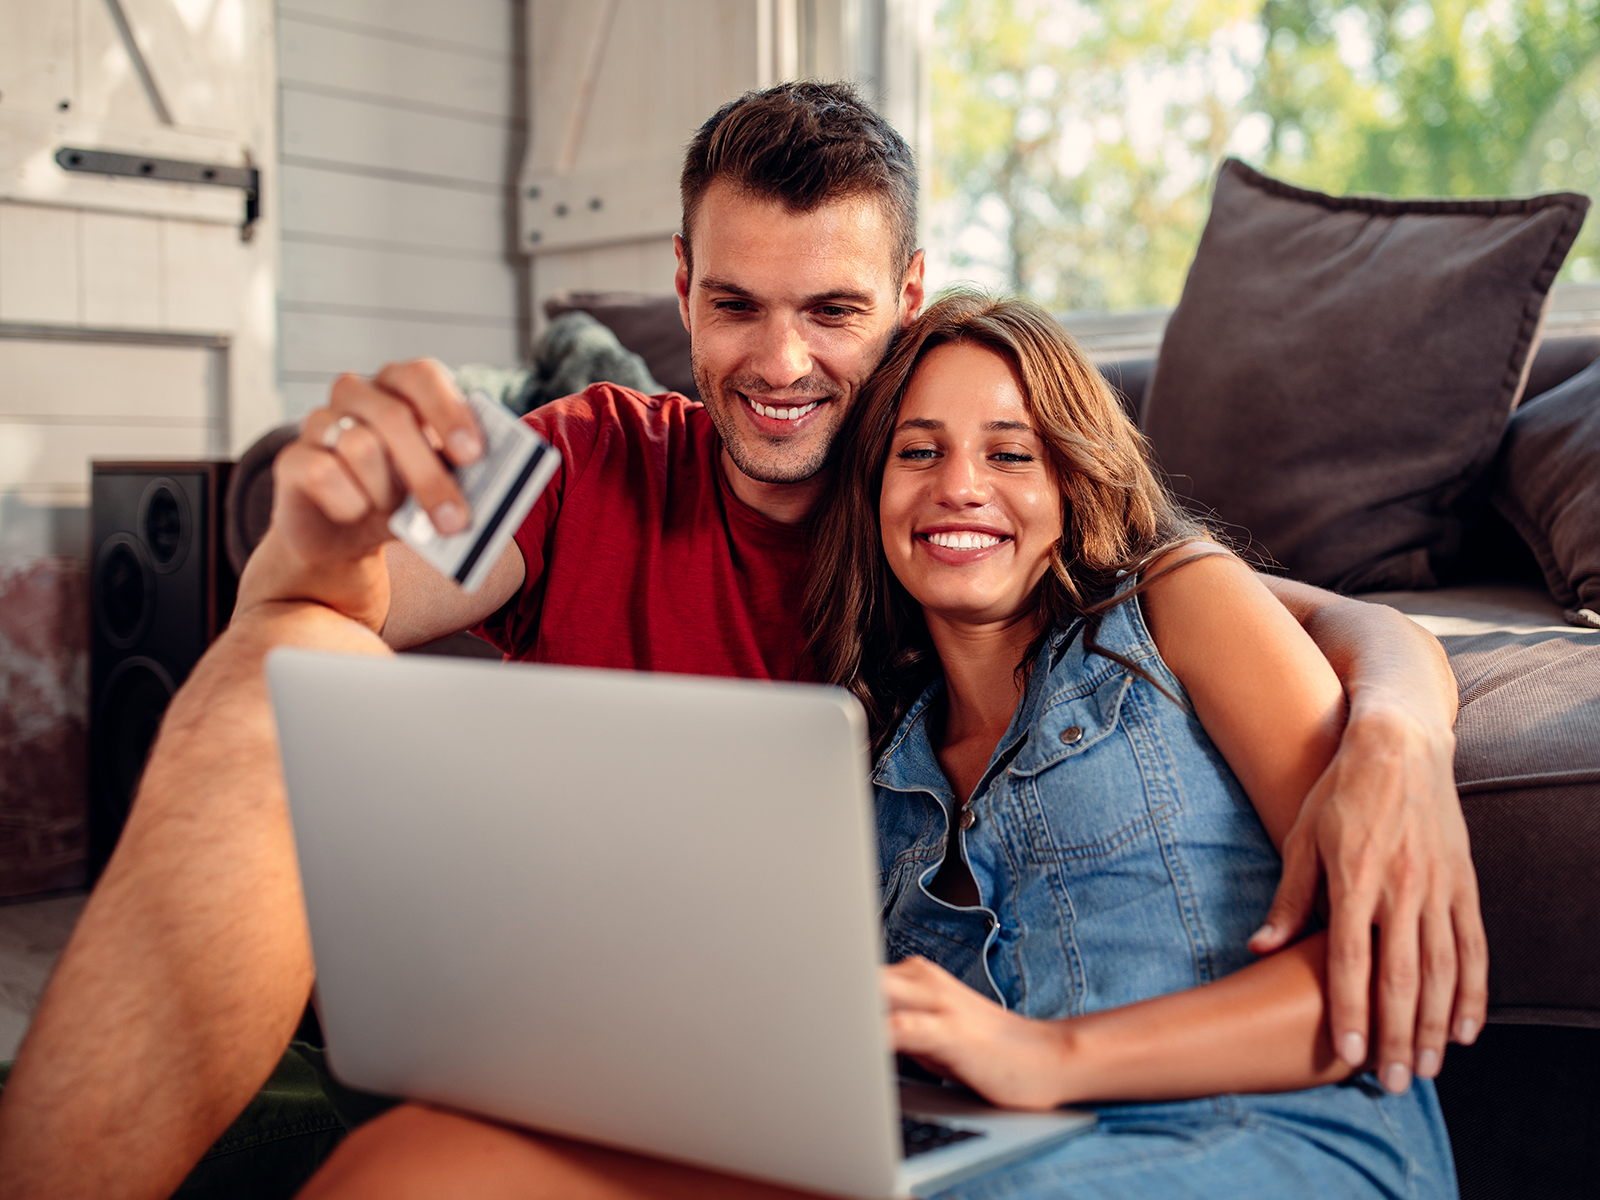 couple sitting together looking at laptop happily